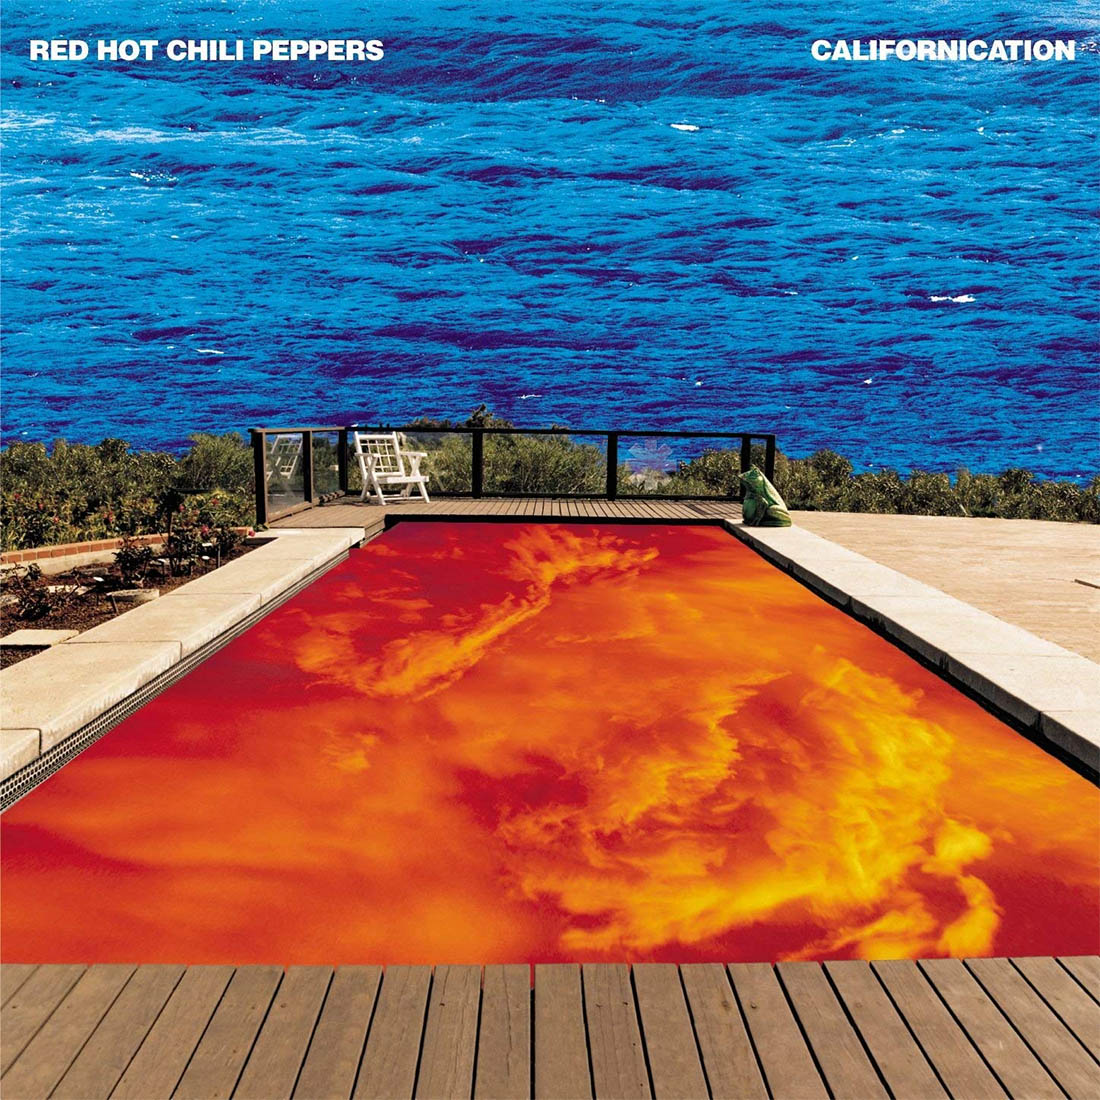 Californication Album Cover by Lawrence Azerrad